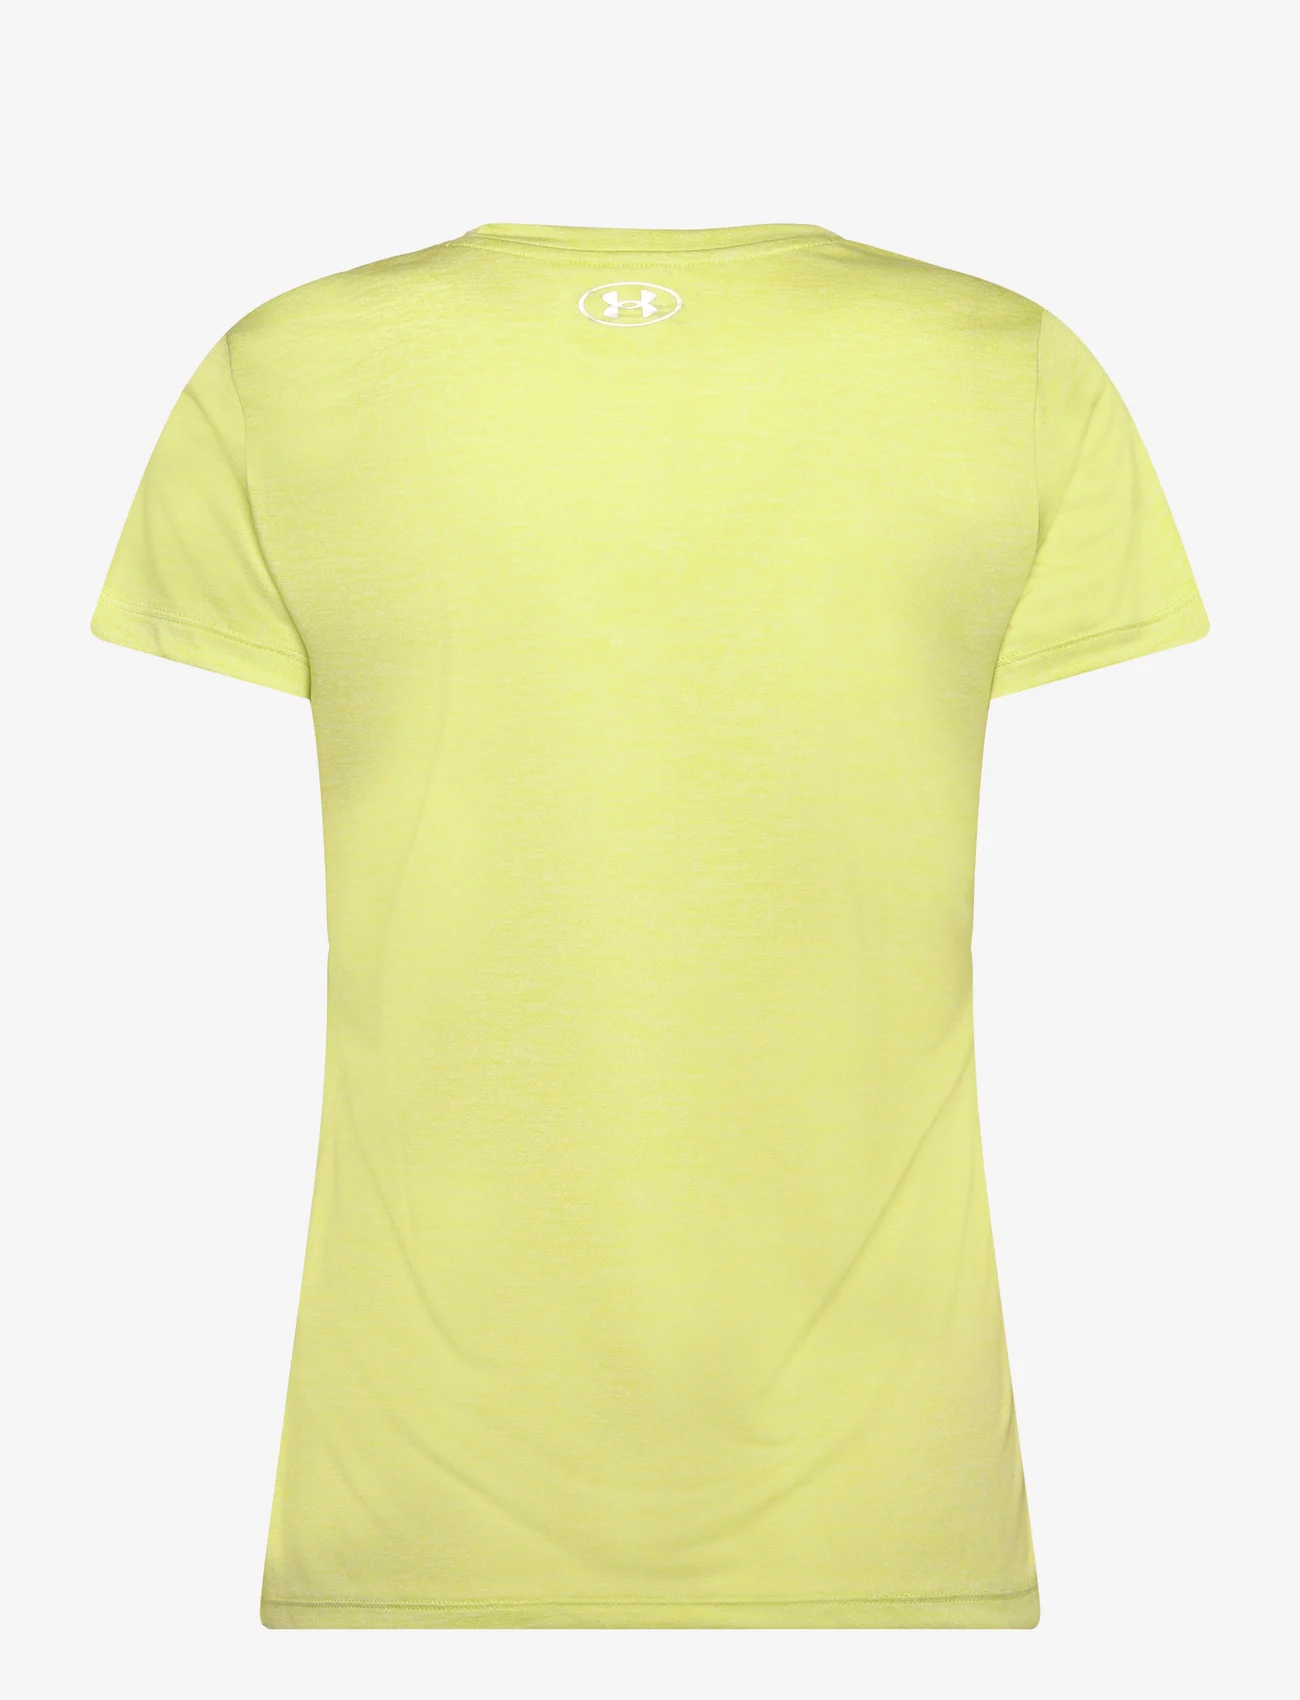 Under Armour - Tech SSV - Twist - t-shirts - lime yellow - 1